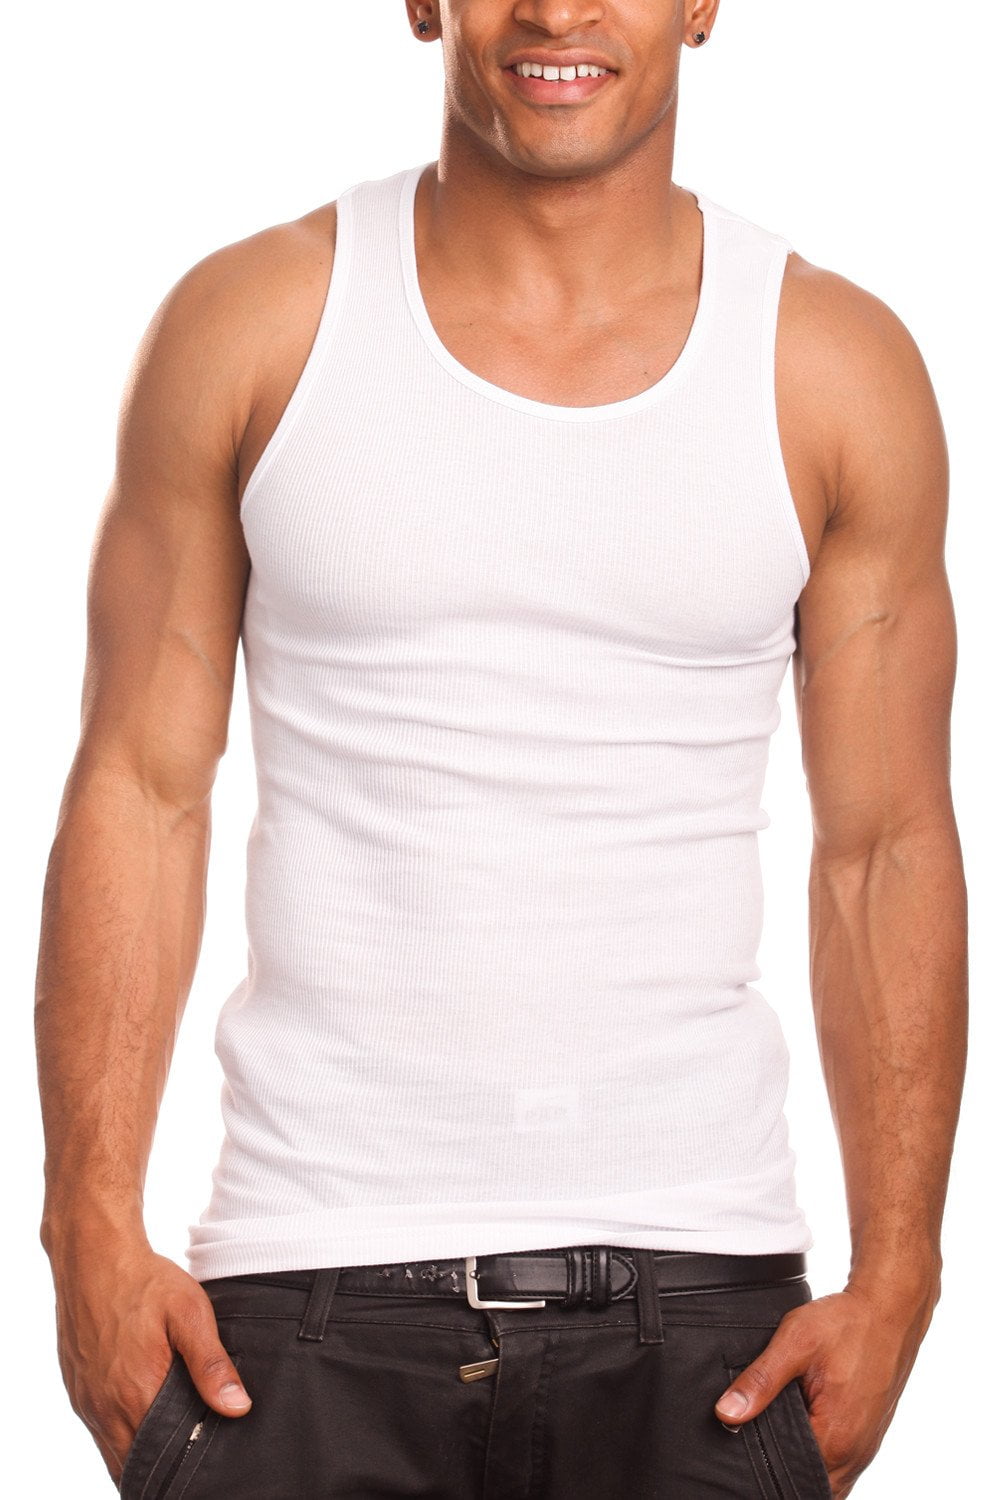 2 or 3 Pack of Men's 100% Cotton Slim Fit Vest Fitted Gym Top Singlet in White 